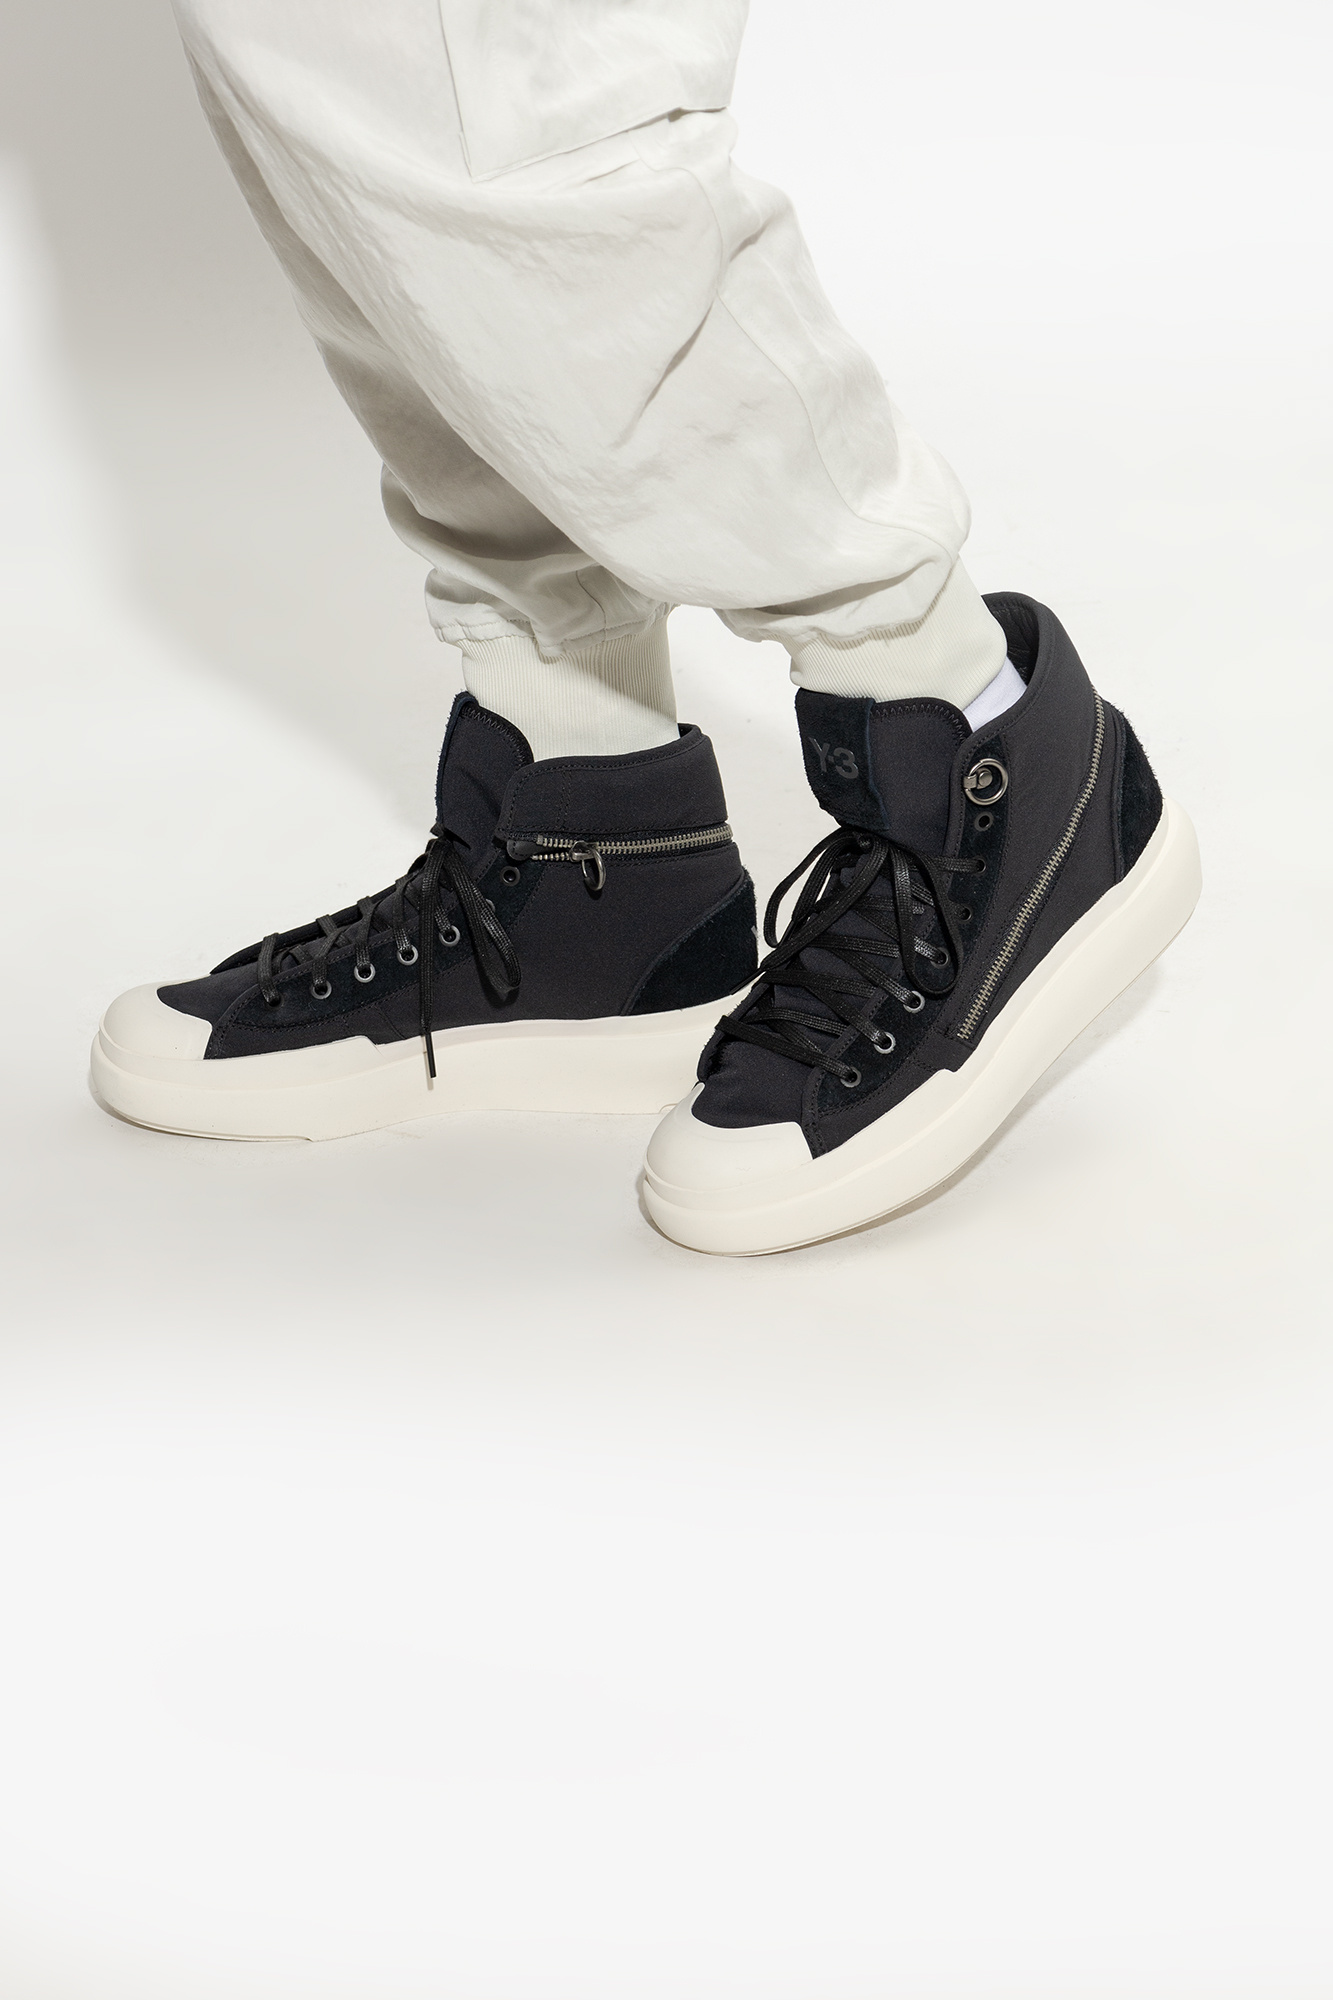 Buy at Shoe Palace ‘Ajatu Court High’ high-top sneakers